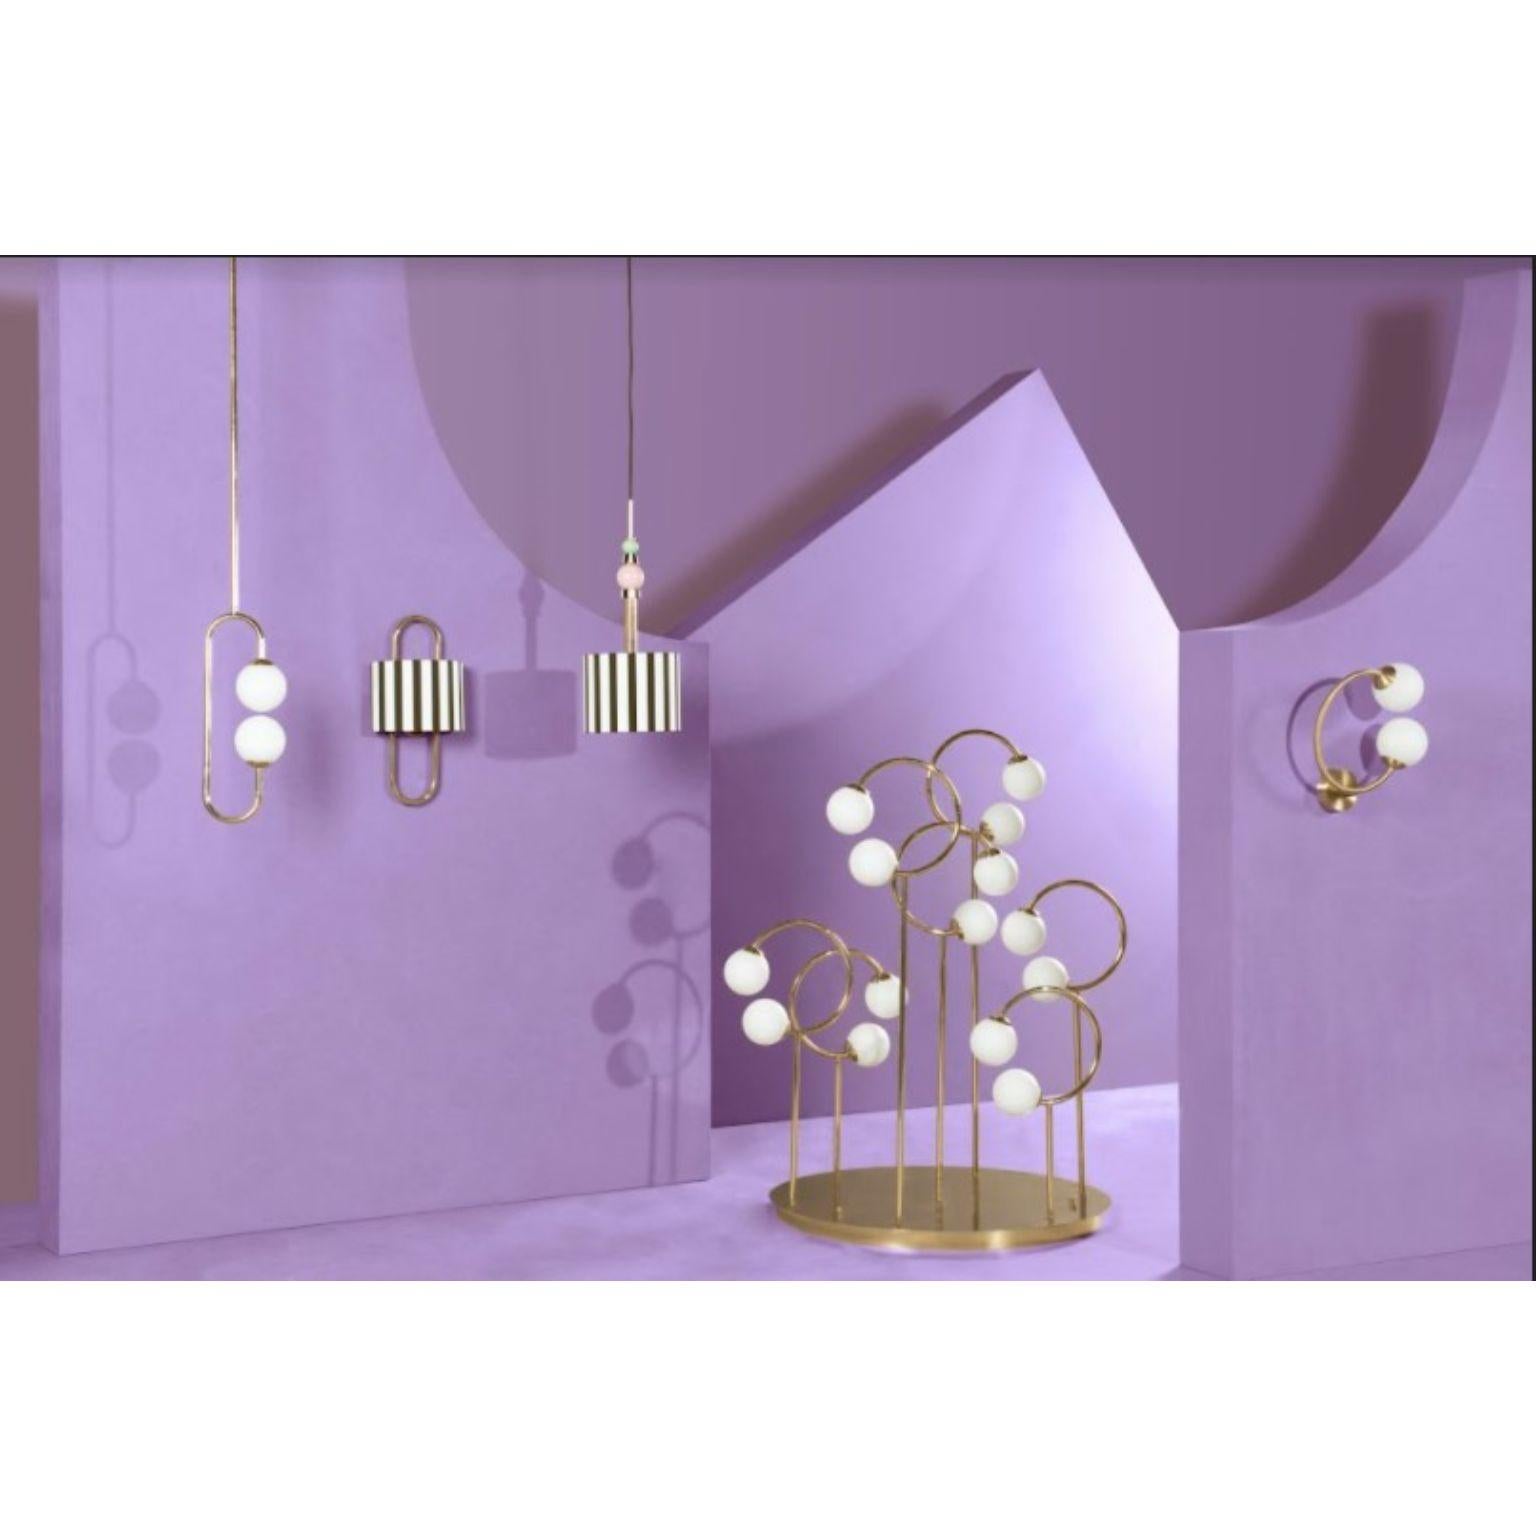 Olivia Stainless Steel Ceiling Lamp, Royal Stranger In New Condition For Sale In Geneve, CH